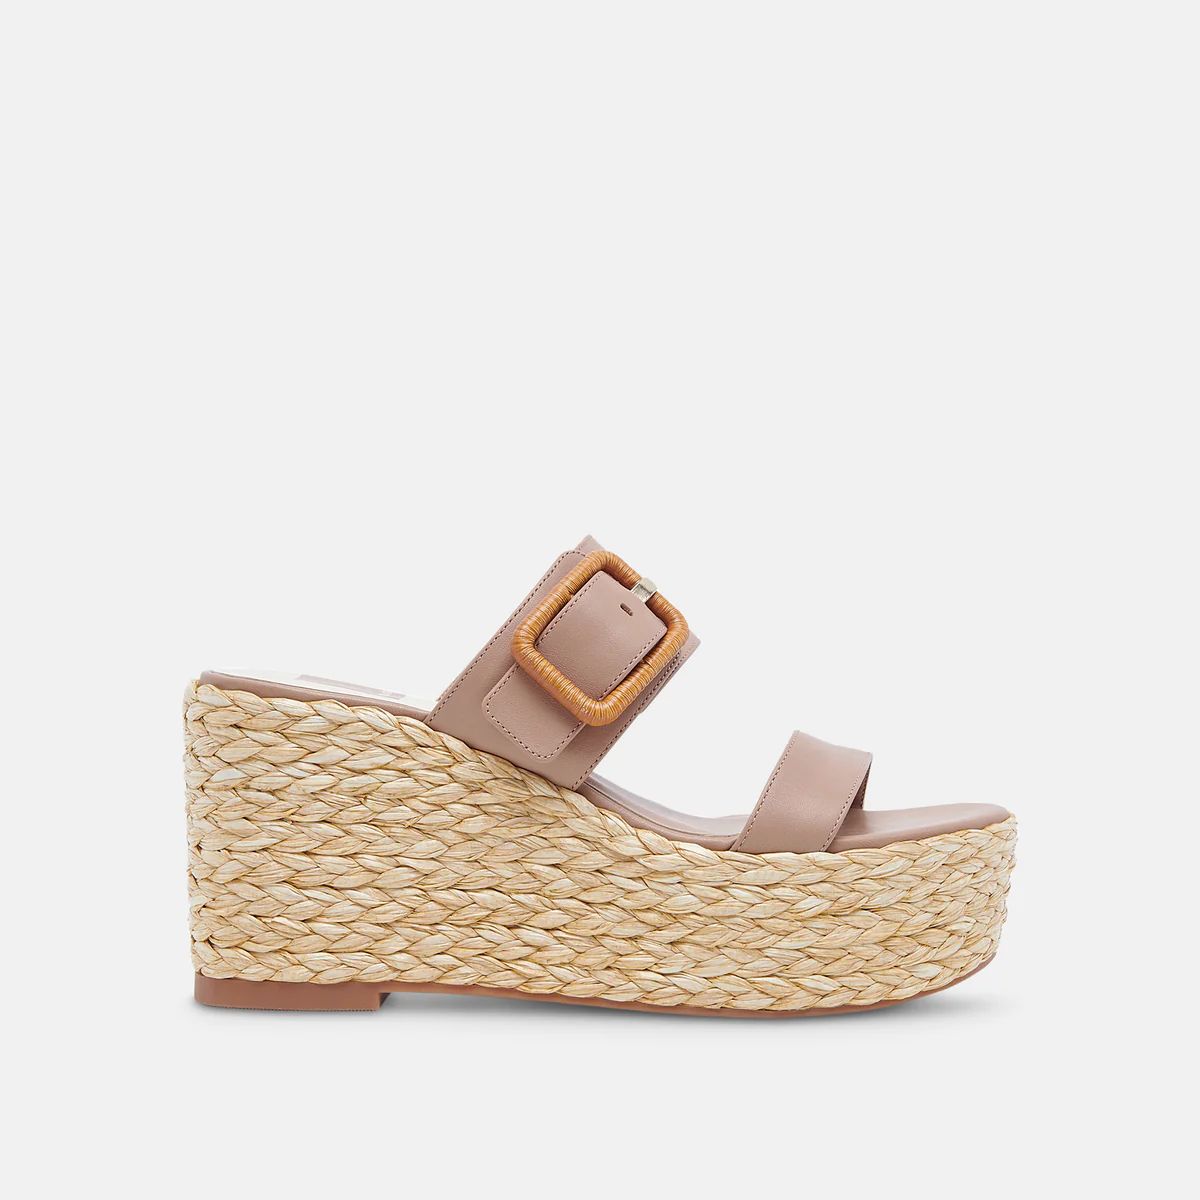 THORIN WEDGES CAFE LEATHER | DolceVita.com